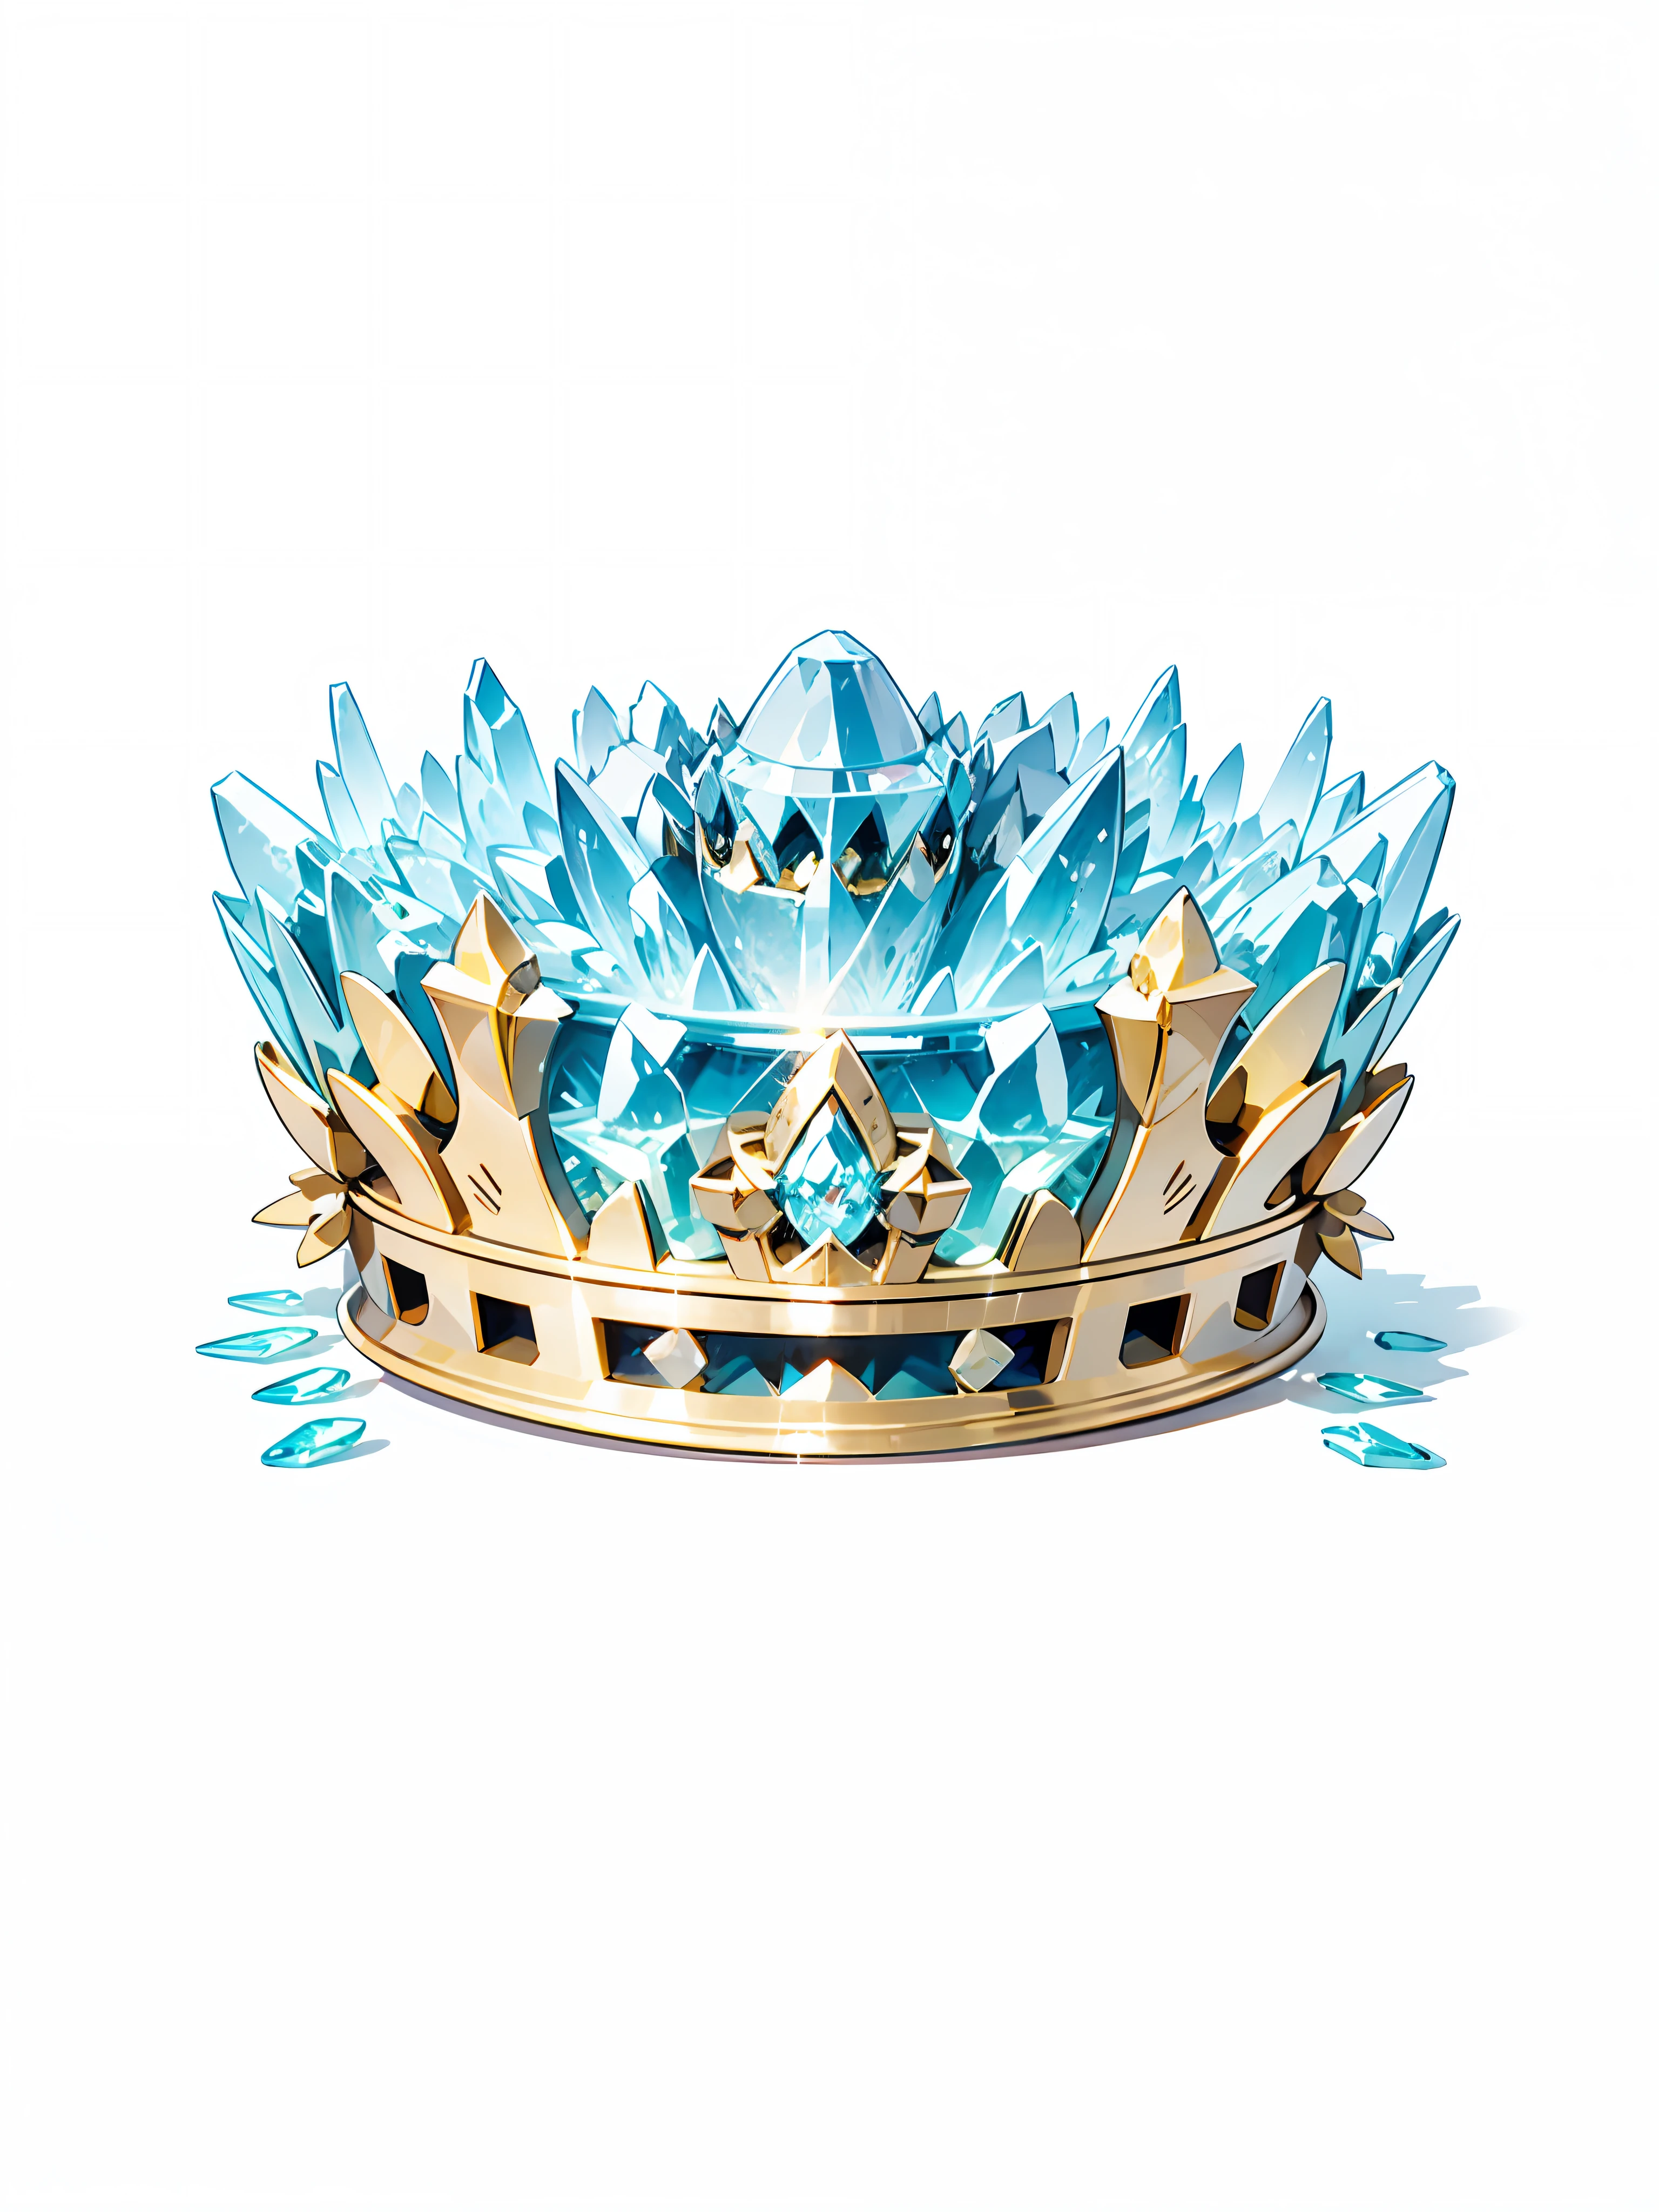 8k, (crown close-up), positive perspective!! , with a gold + diamond crown on a white background, diamond wings!! ,((((Game Crown)))),((Gold + Diamond Crown)),((Left and Right Symmetrical Crown)),((Streamlined Crown)))),(Slender Crown))),Gorgeous, Colorful, Complex Diamonds, Ultra Realistic Fantasy Crown, Crystal Crown, White Laser Crown, Crystal Corolla, Floating Crown, (Ray Tracing), (Clean Background)), Crown, Flower Corolla, Crown, Giant Diamond Crown, Diamond Headgear, Amazing Flower Corolla, Diamond Crown --auto --s2